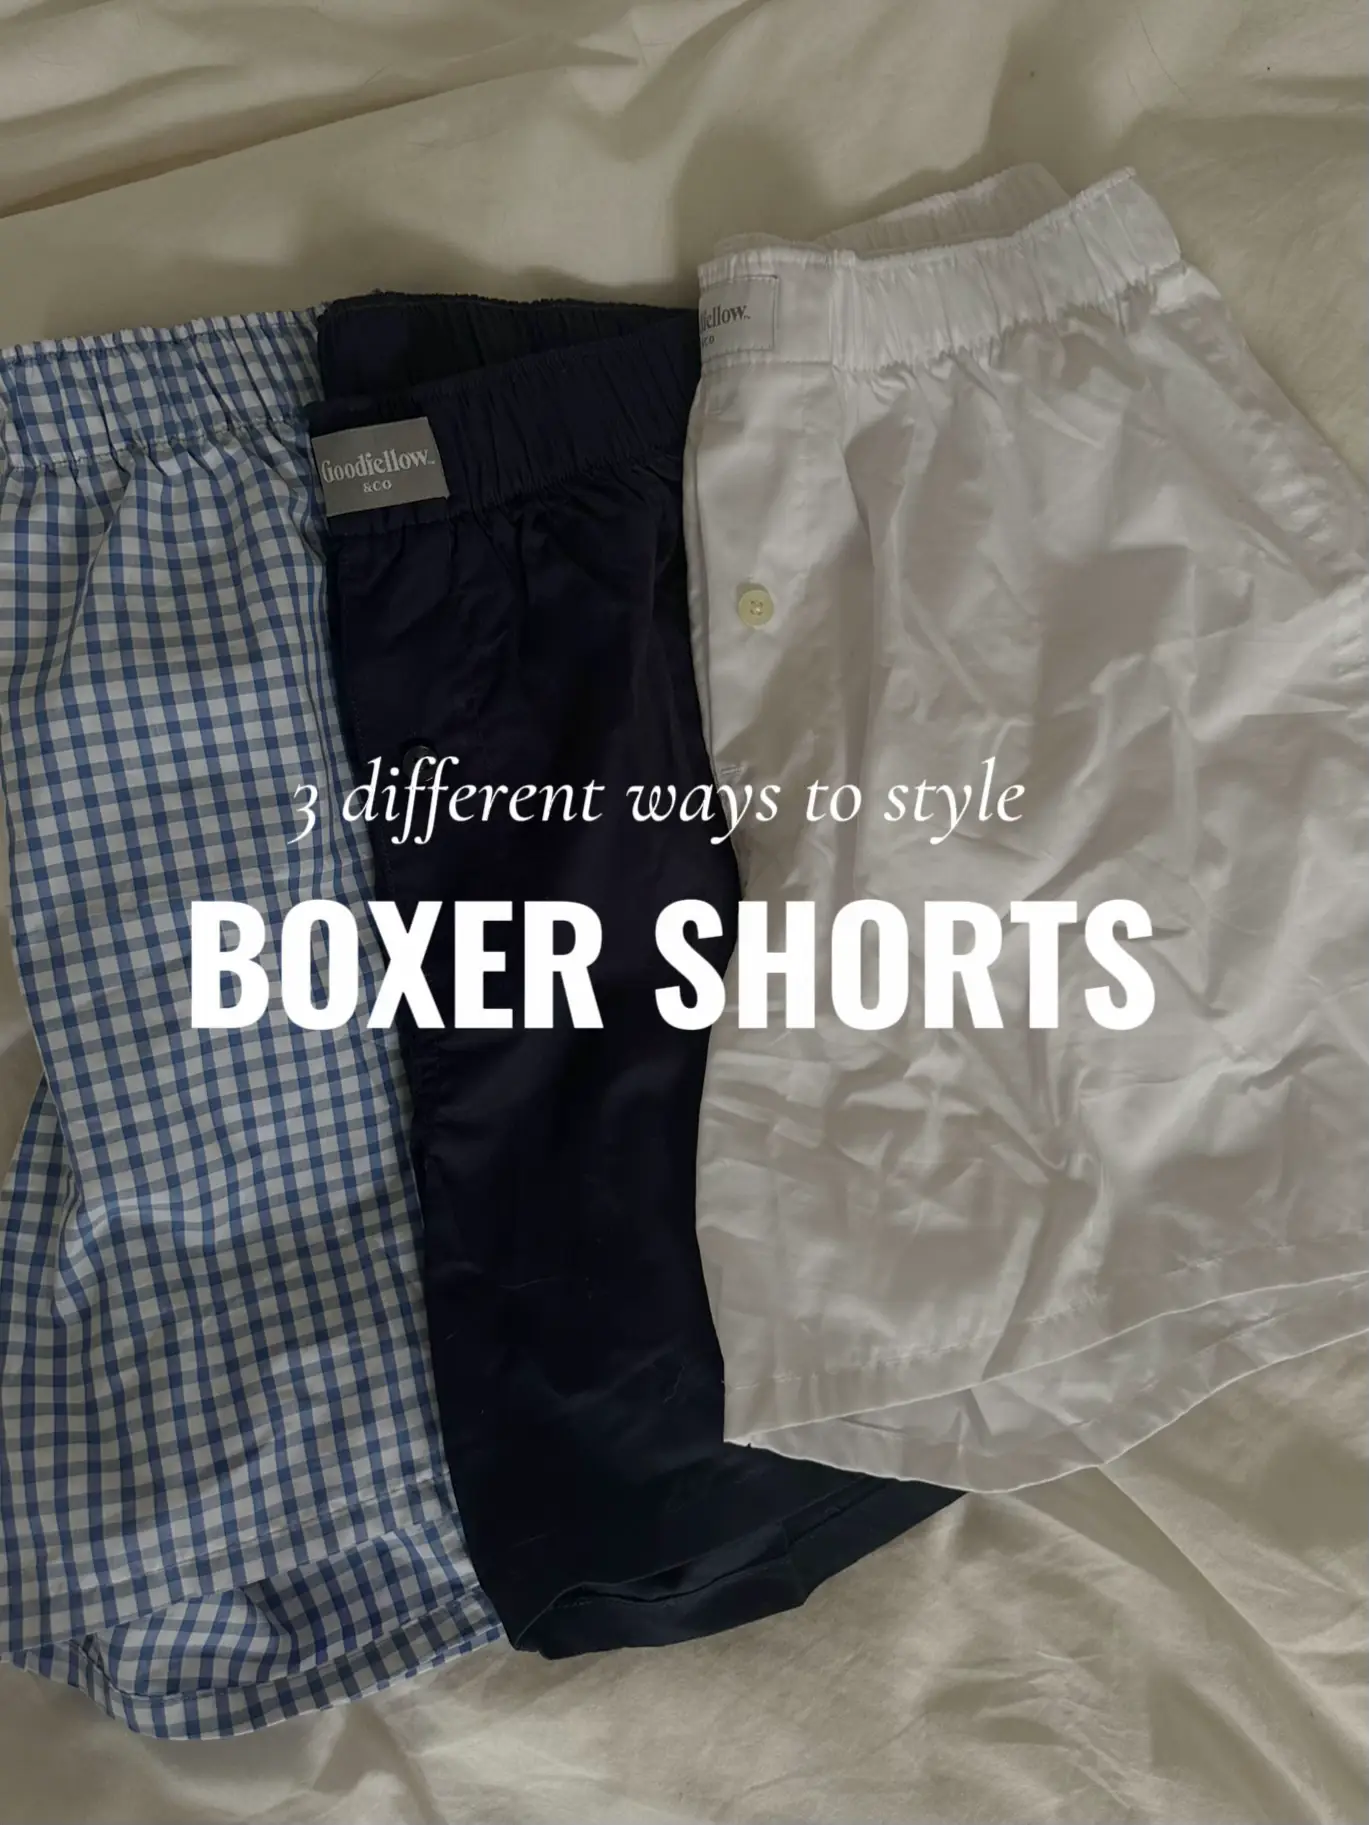 3 different ways to style boxer shorts